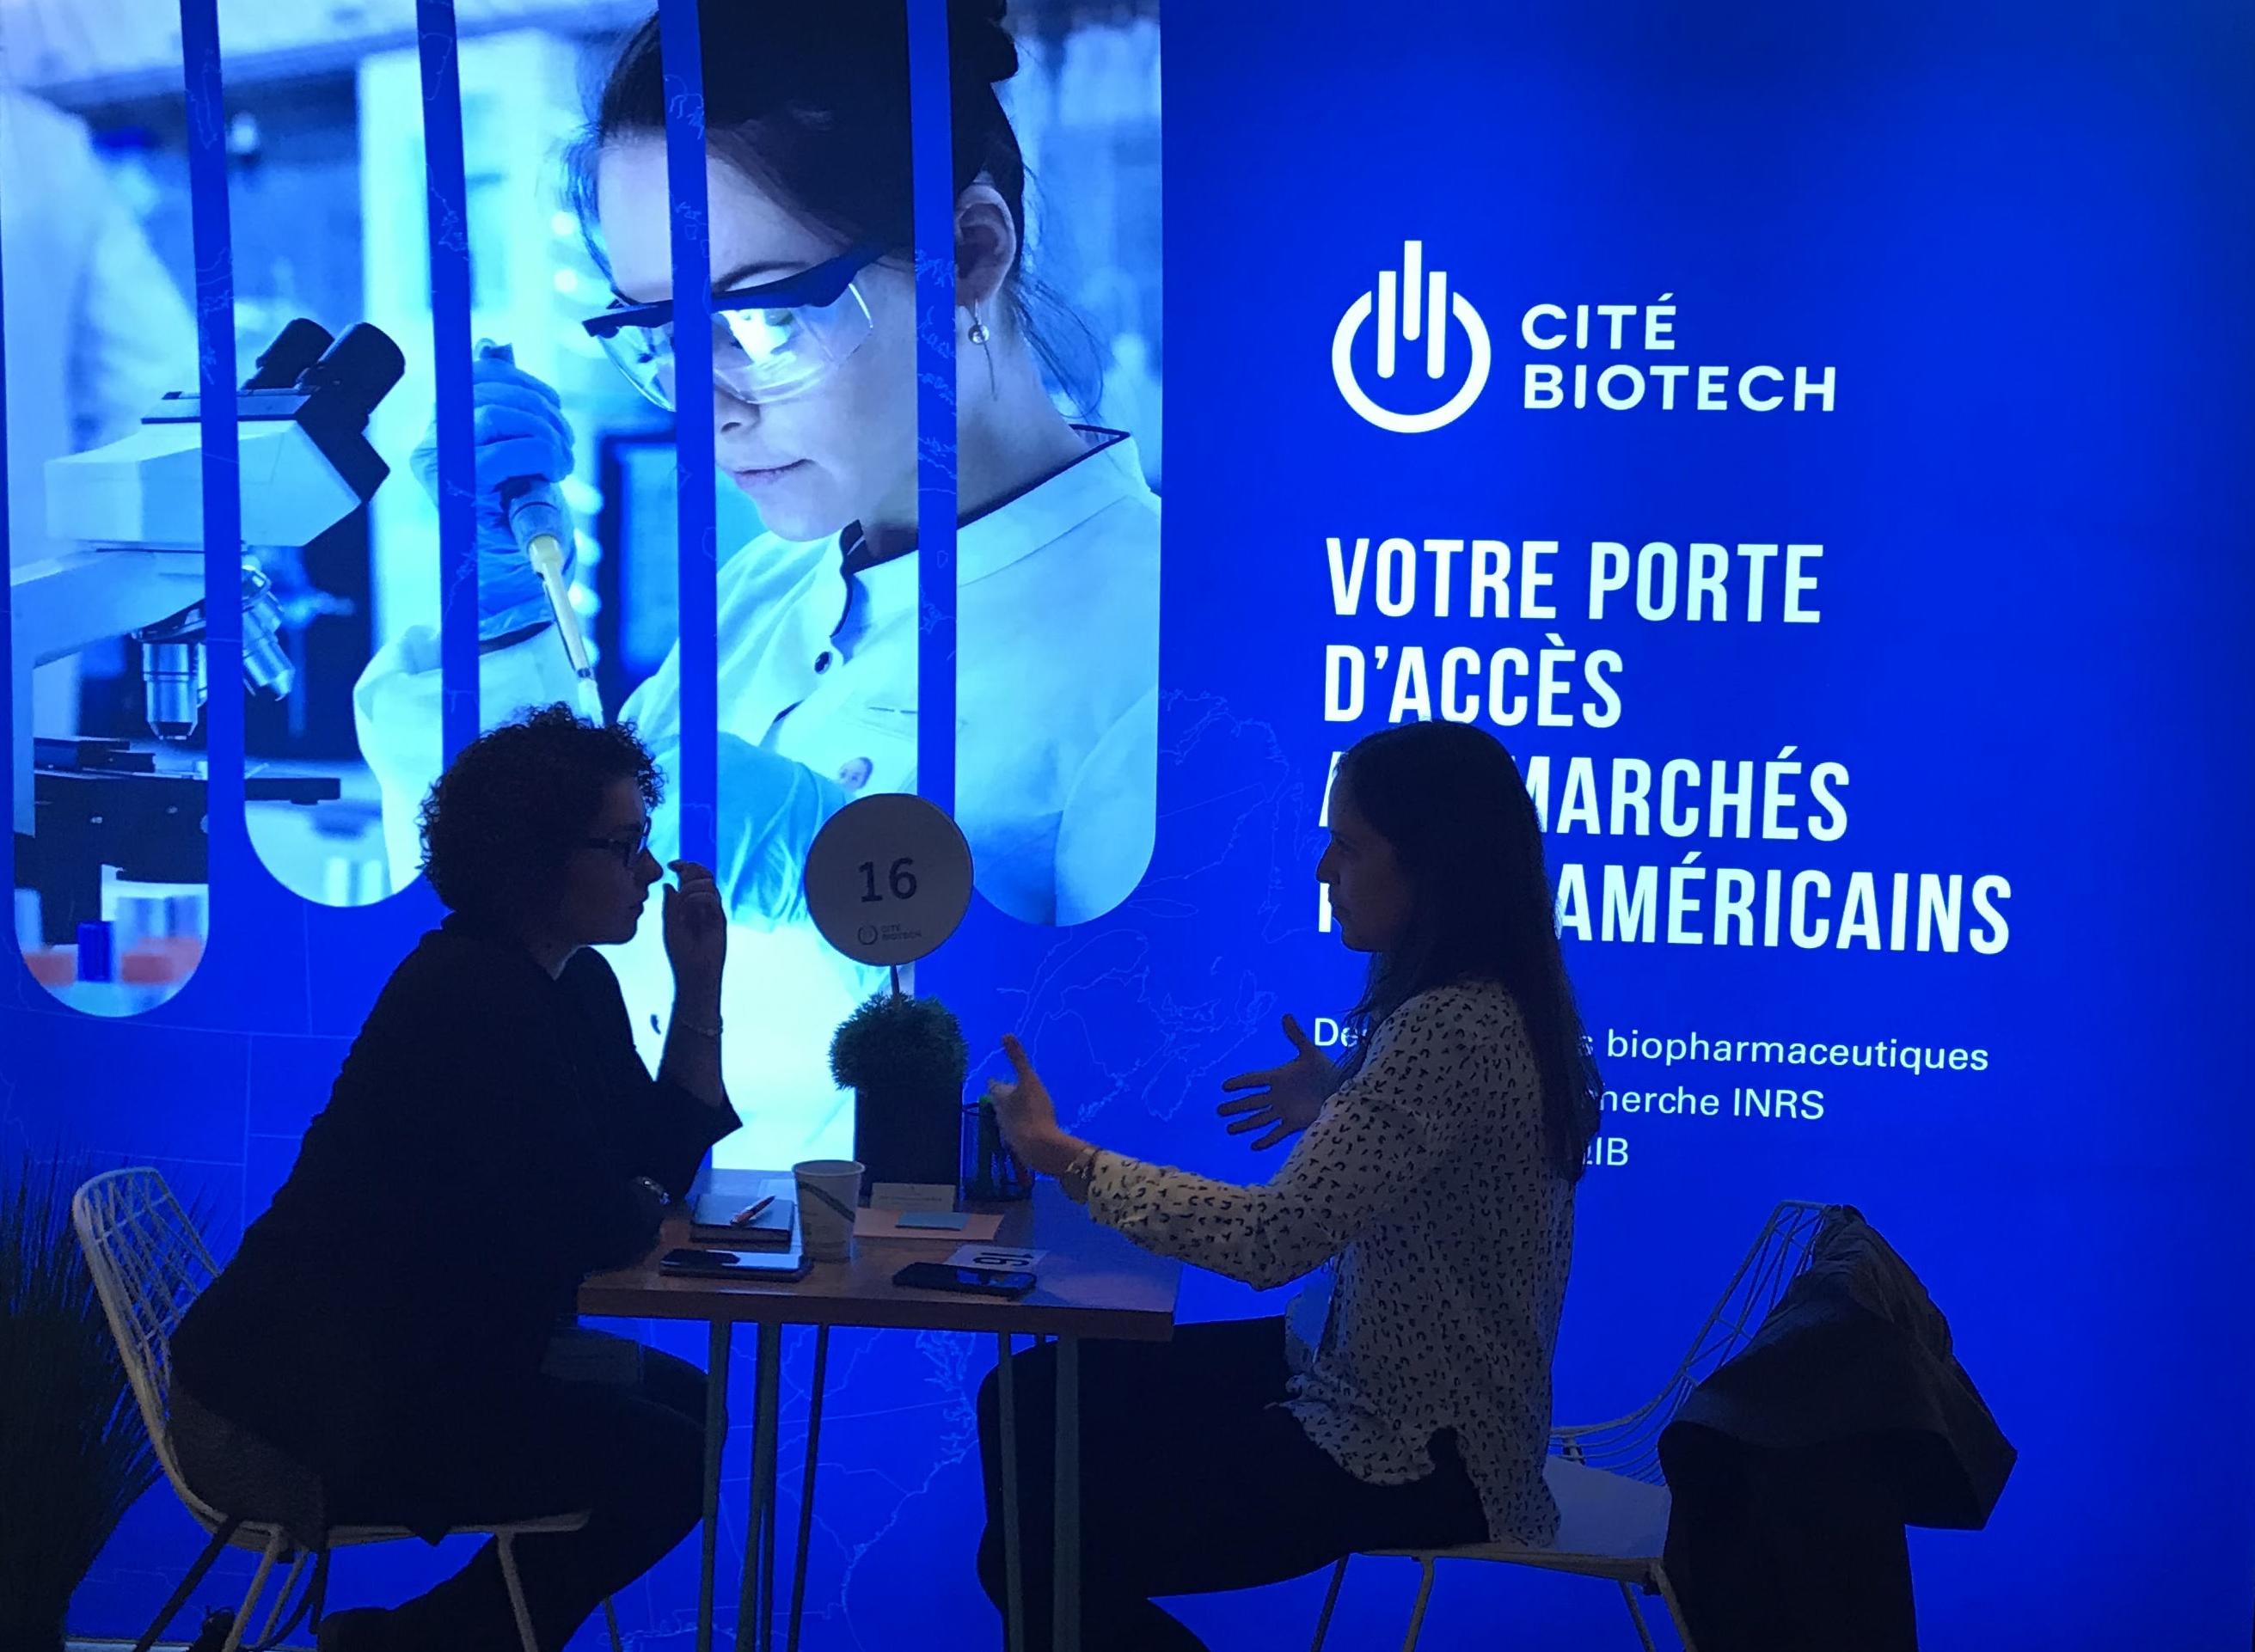 The Biotech City was at Effervescence